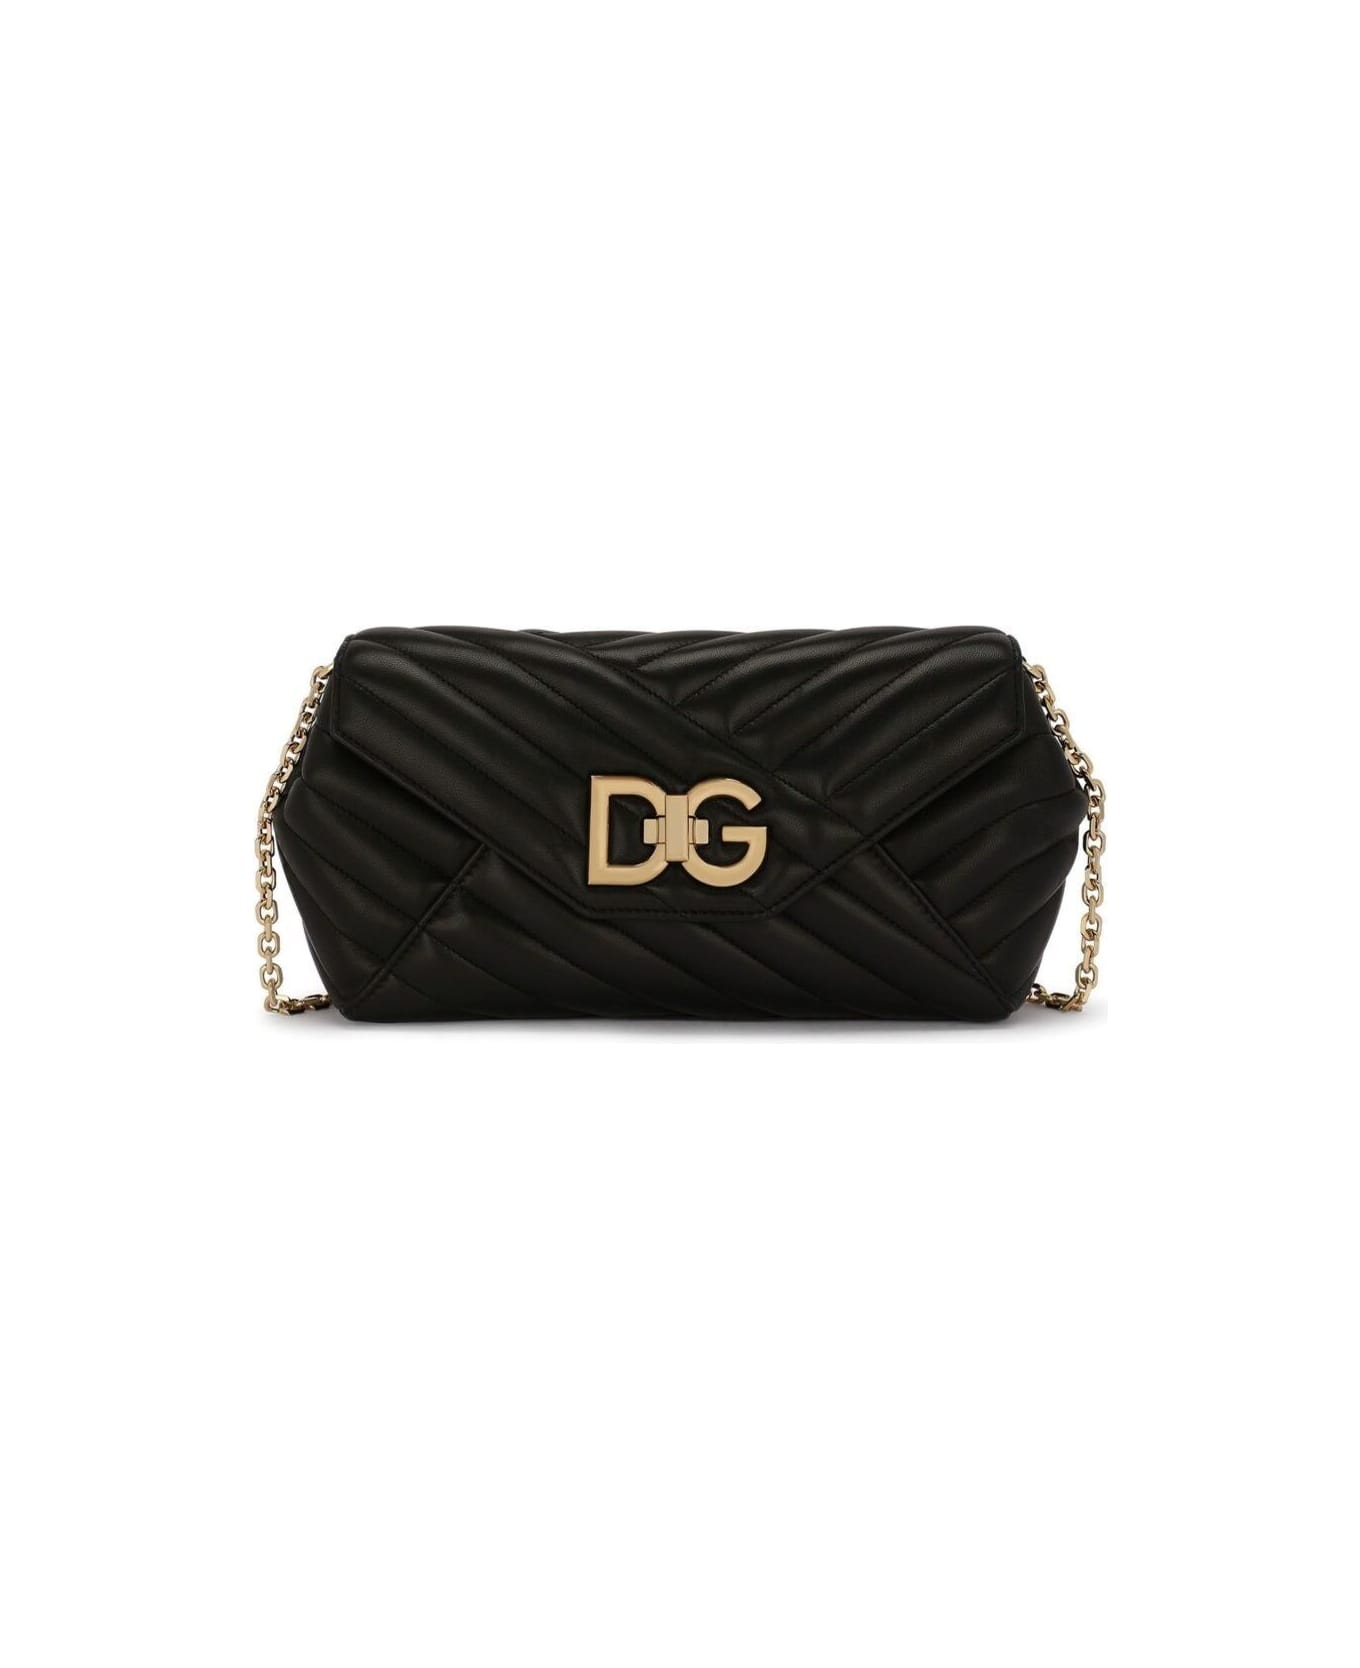 Dolce & Gabbana 'lop' Medium Black Bag With Dg Logo Fastening In Quilted Nappa Leather Woman Dolce & Gabbana - Black